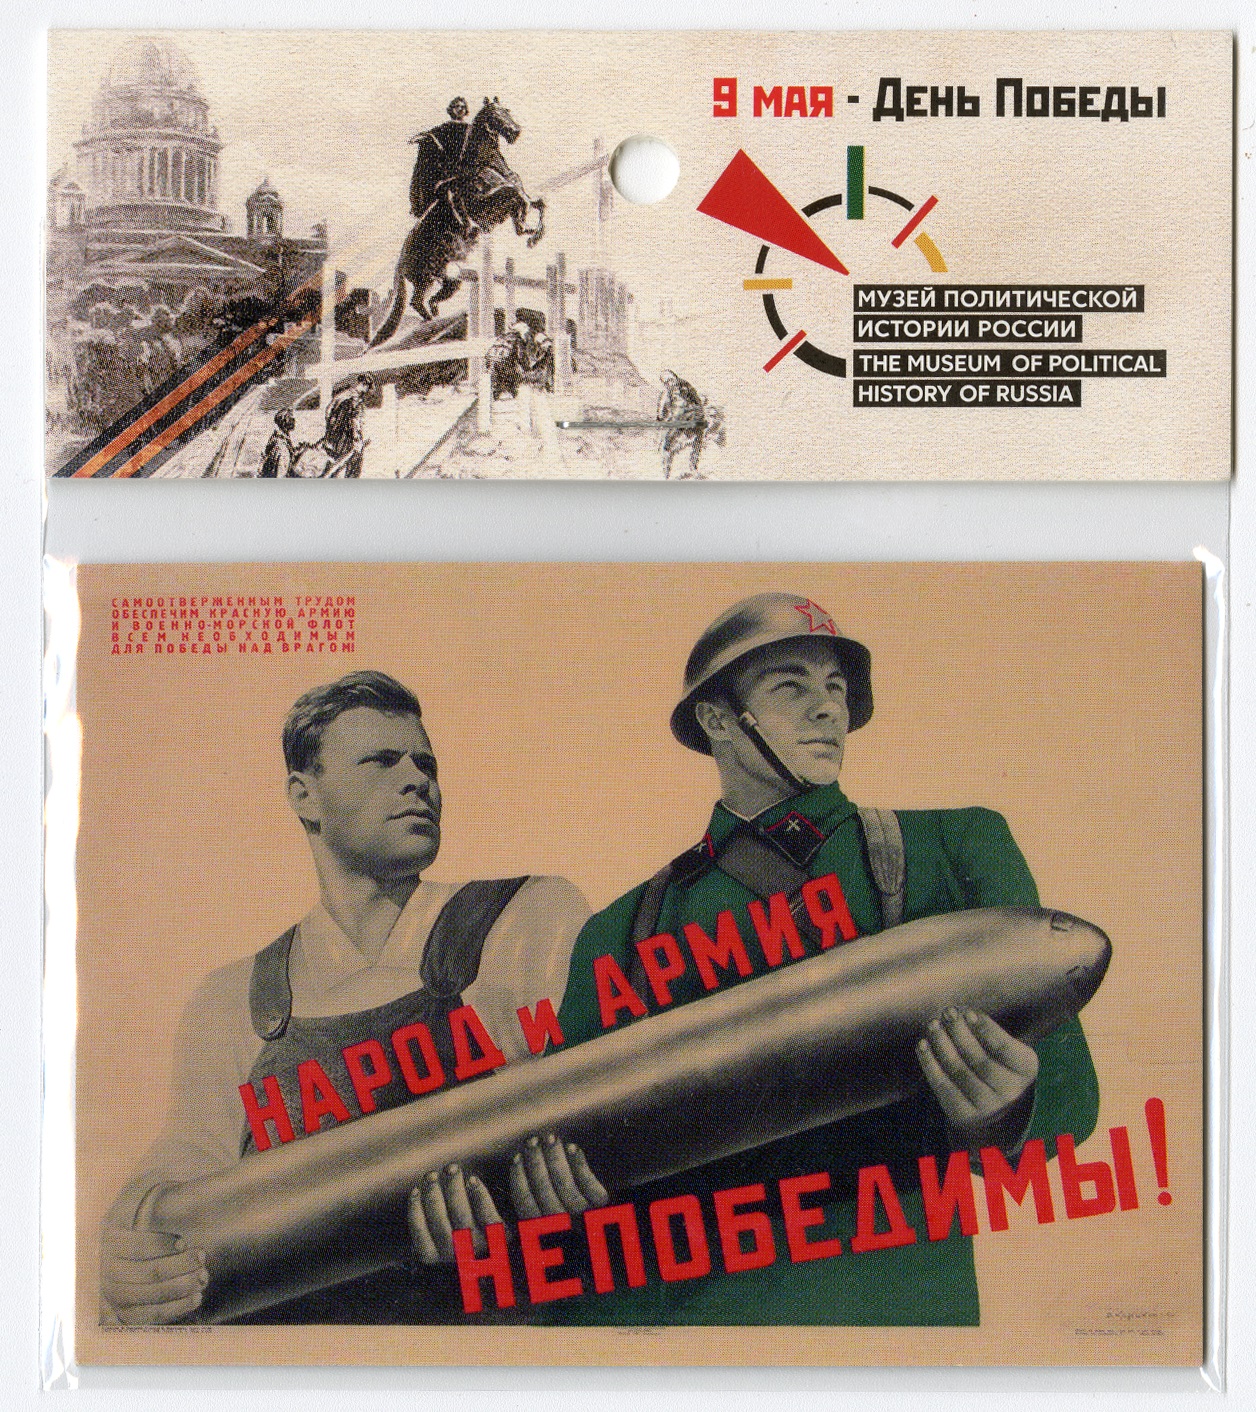 «The People and the Army are Invincible» (The Great Patriotic War)